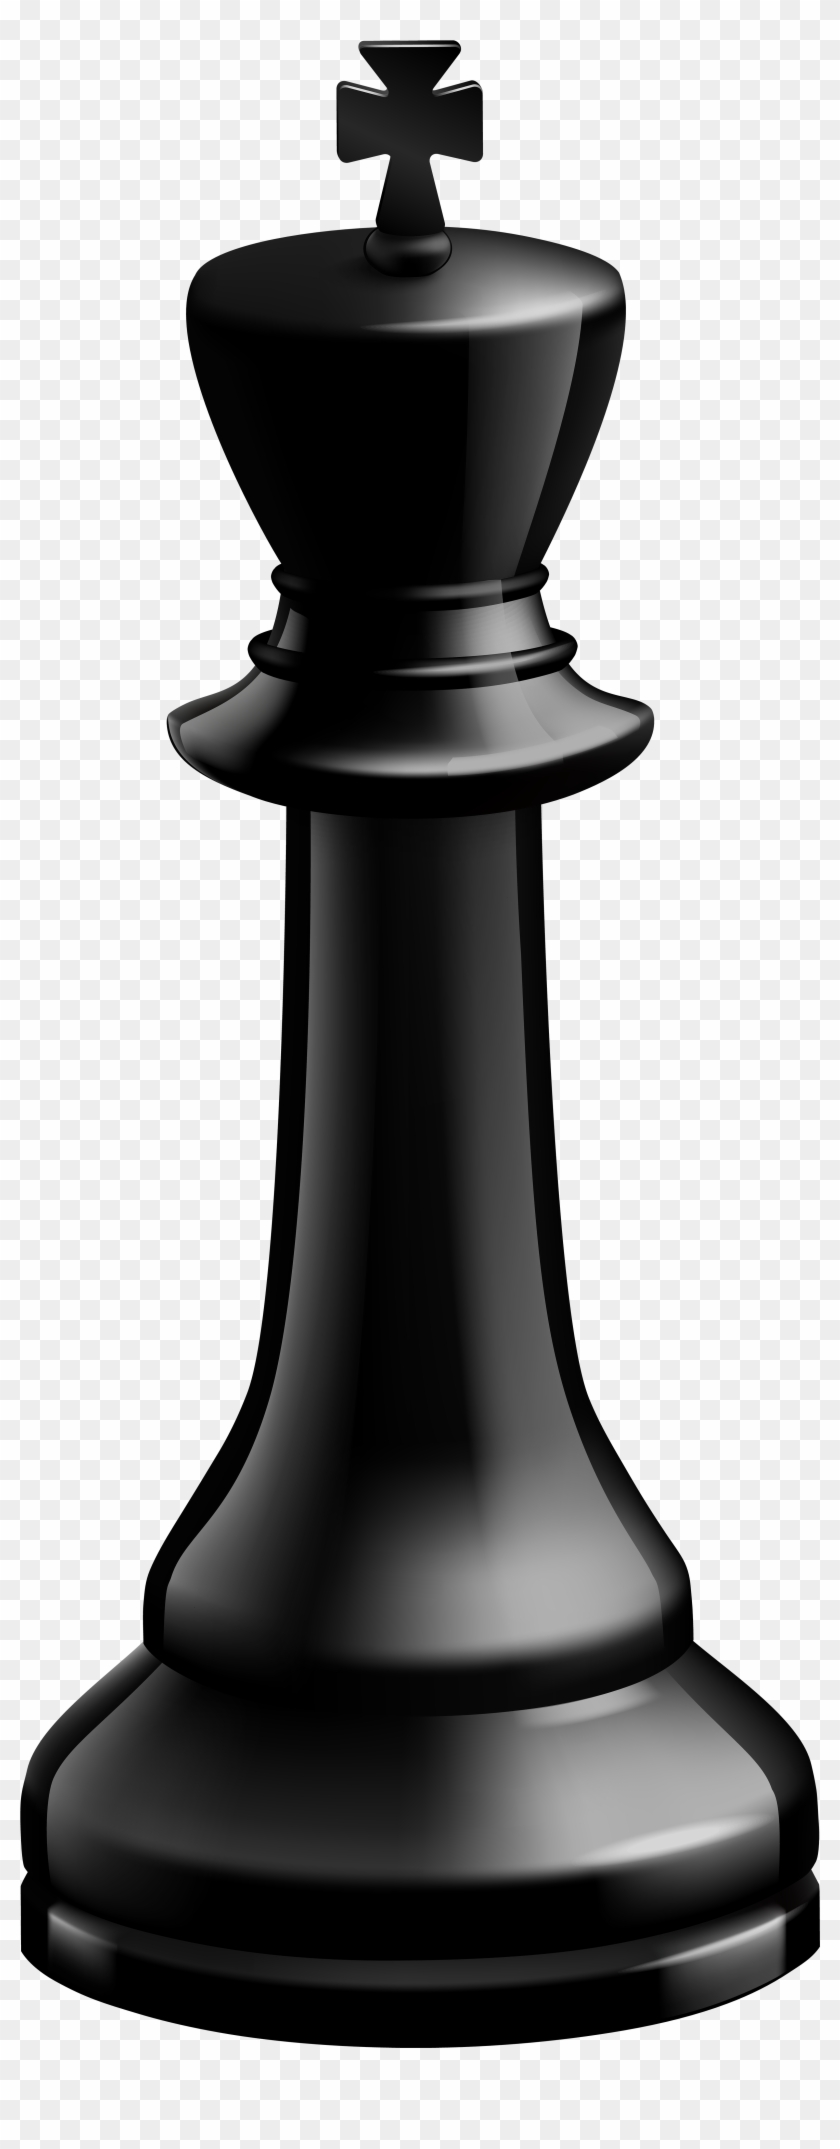 King Black Chess Piece Png Clip Art - King Chess Piece Png #1350555